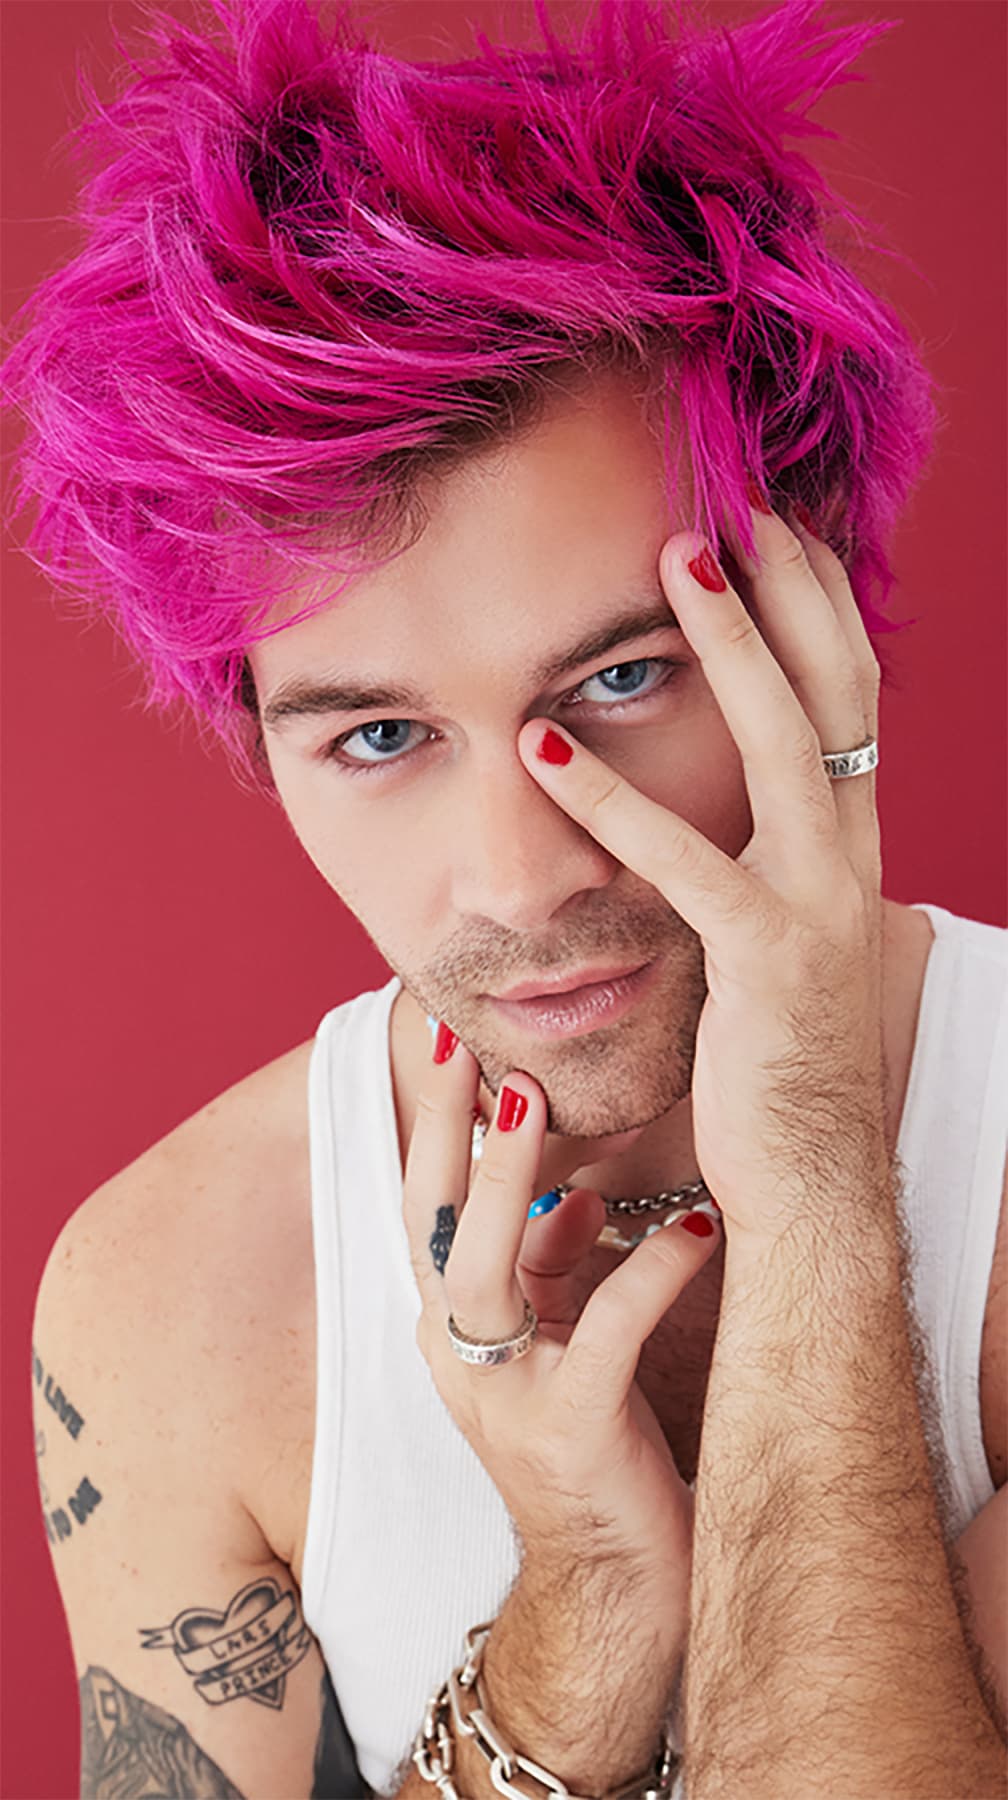 Stylish man with intense gaze, featuring Arctic Fox's Virgin Pink hair color, complementing his edgy look with painted nails and trendy jewelry.